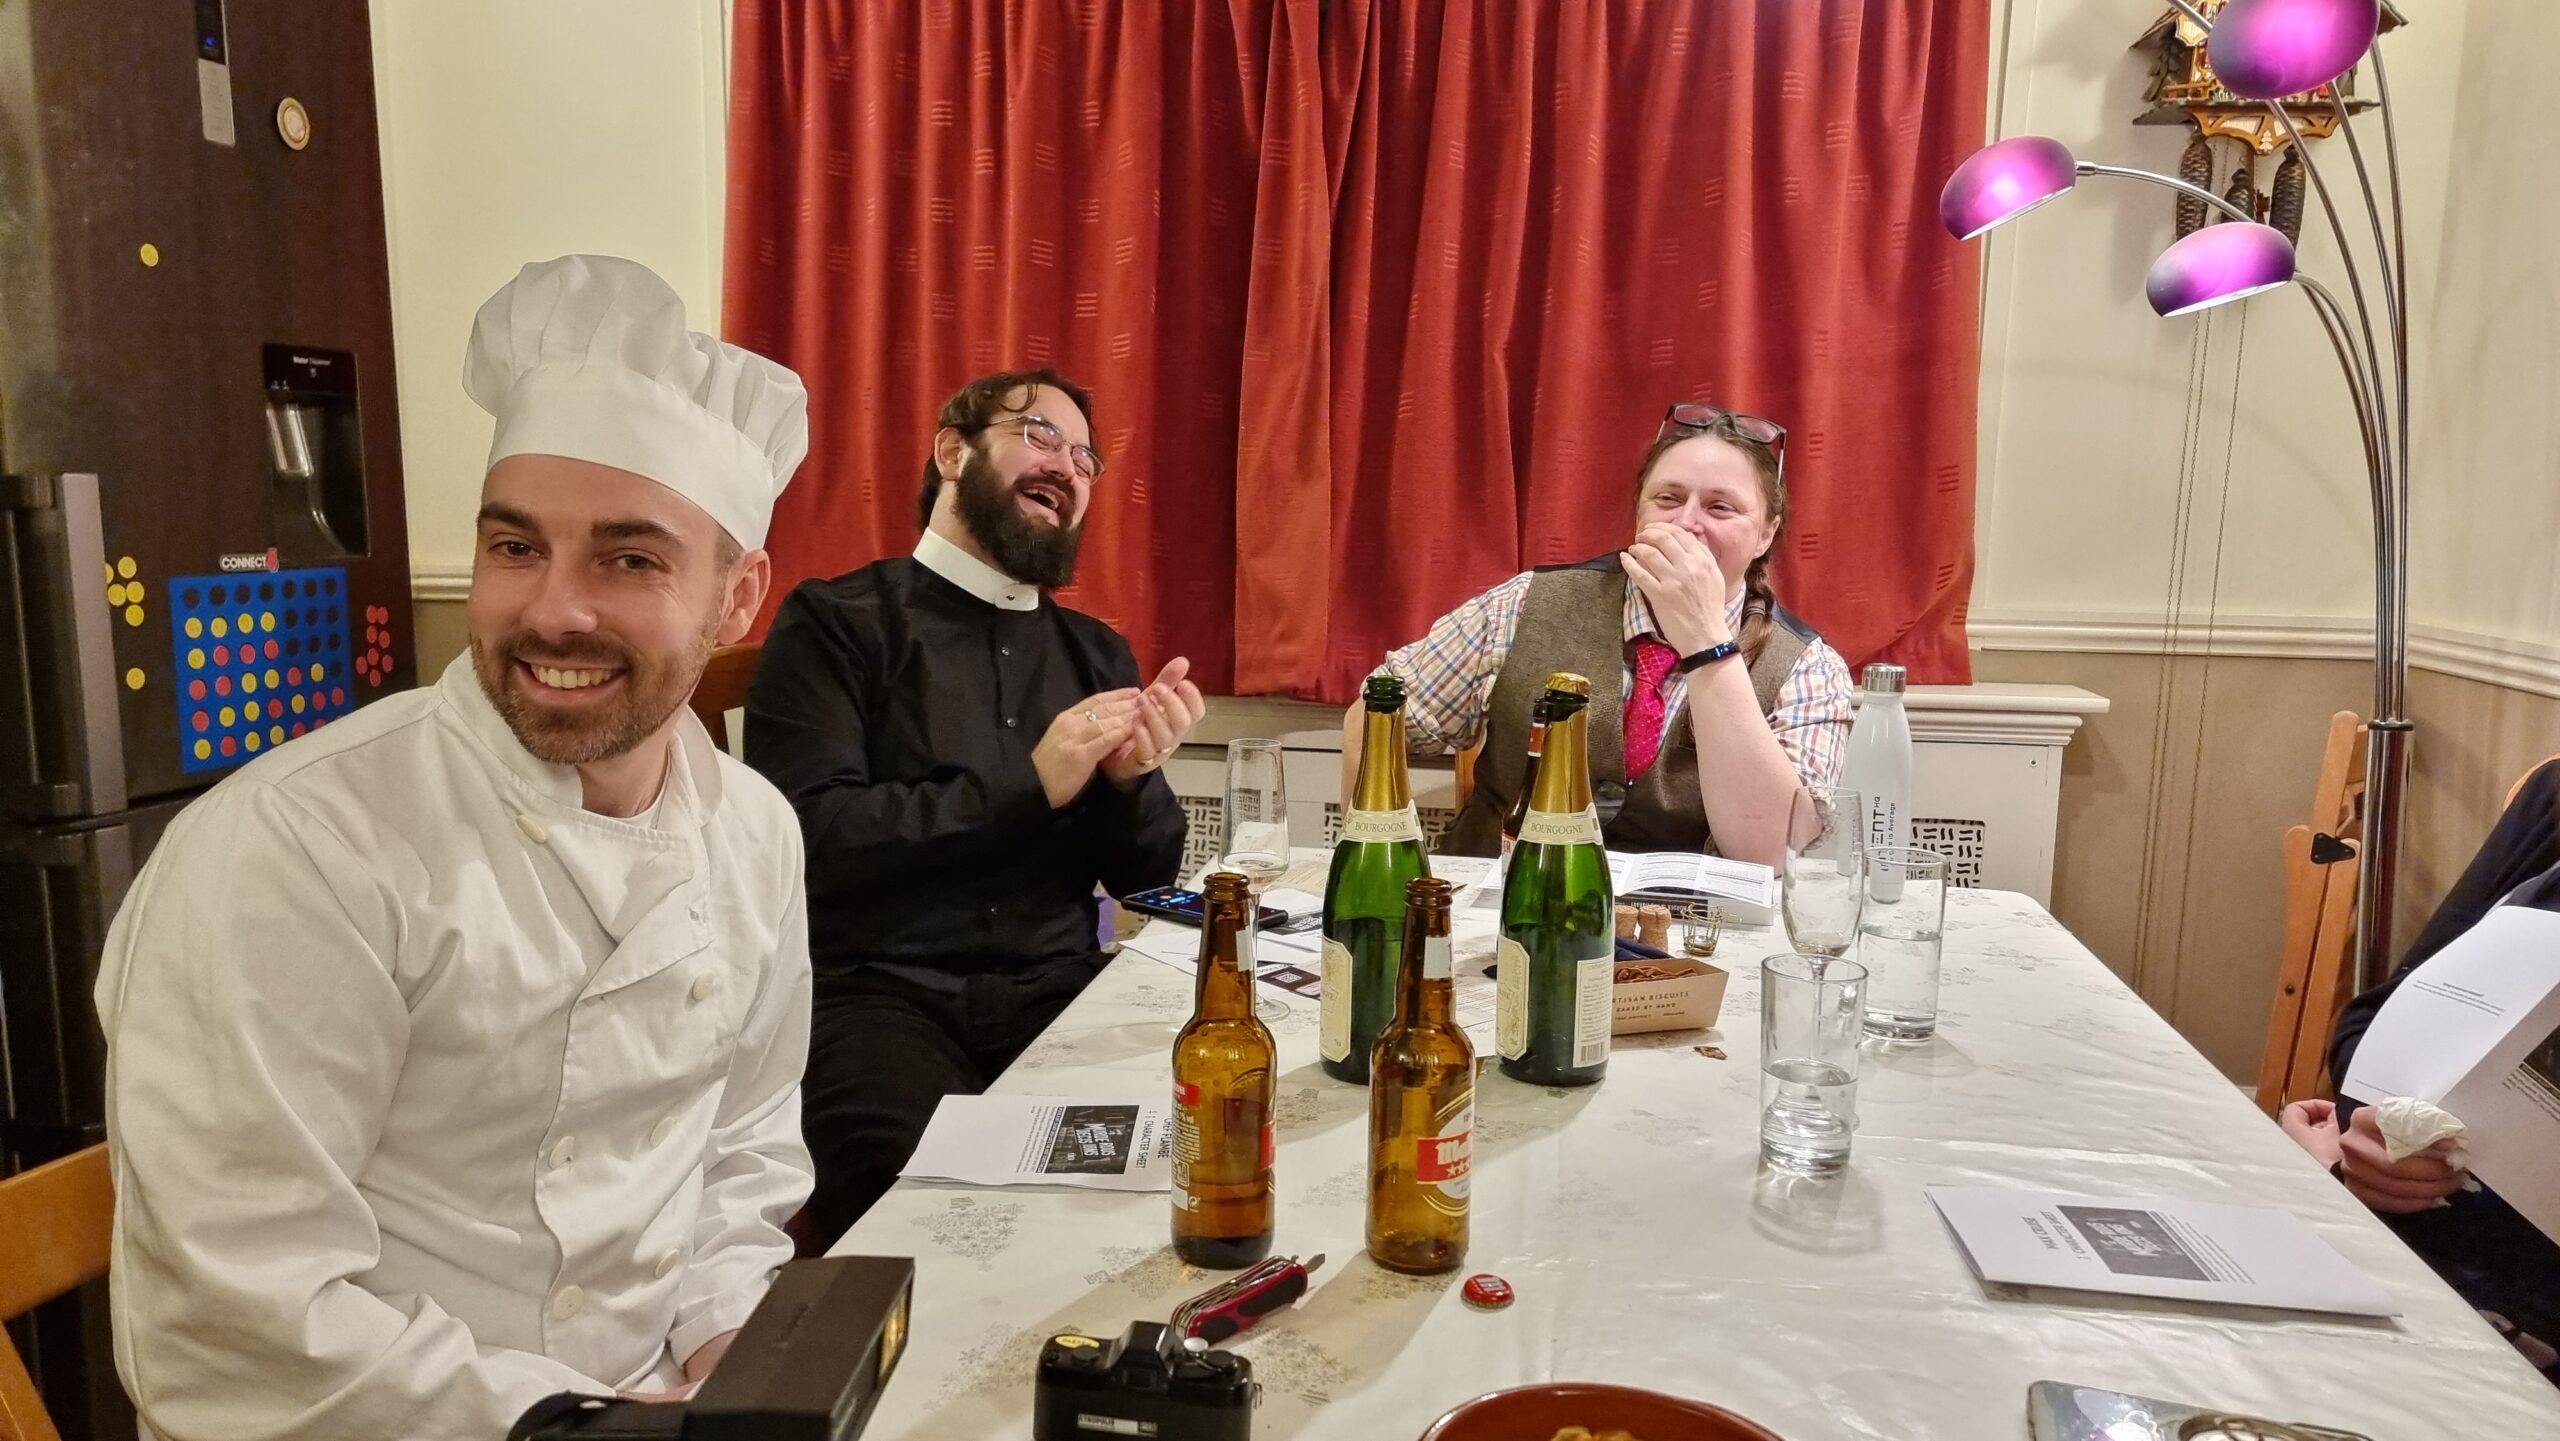 Guests dressed as a chef, a priest, and a librarian sit around a dining table at a murder mystery party.